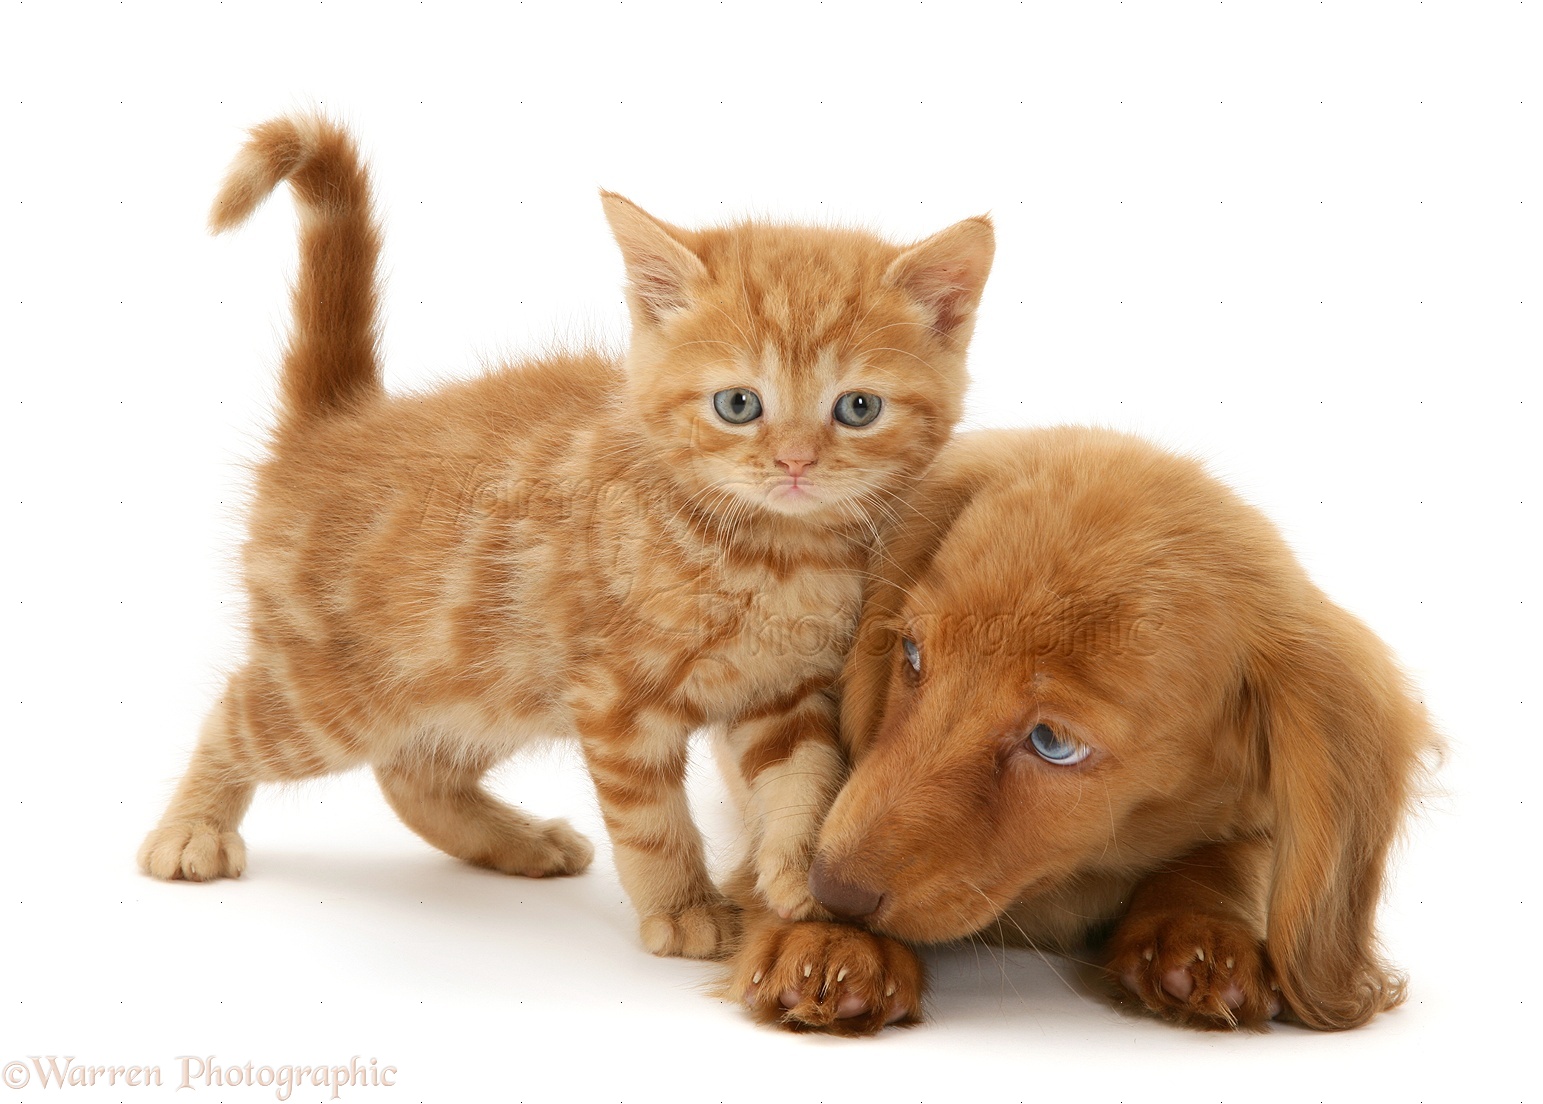 Pets Dachshund Pup And Ginger Kitten Photo Wp22066